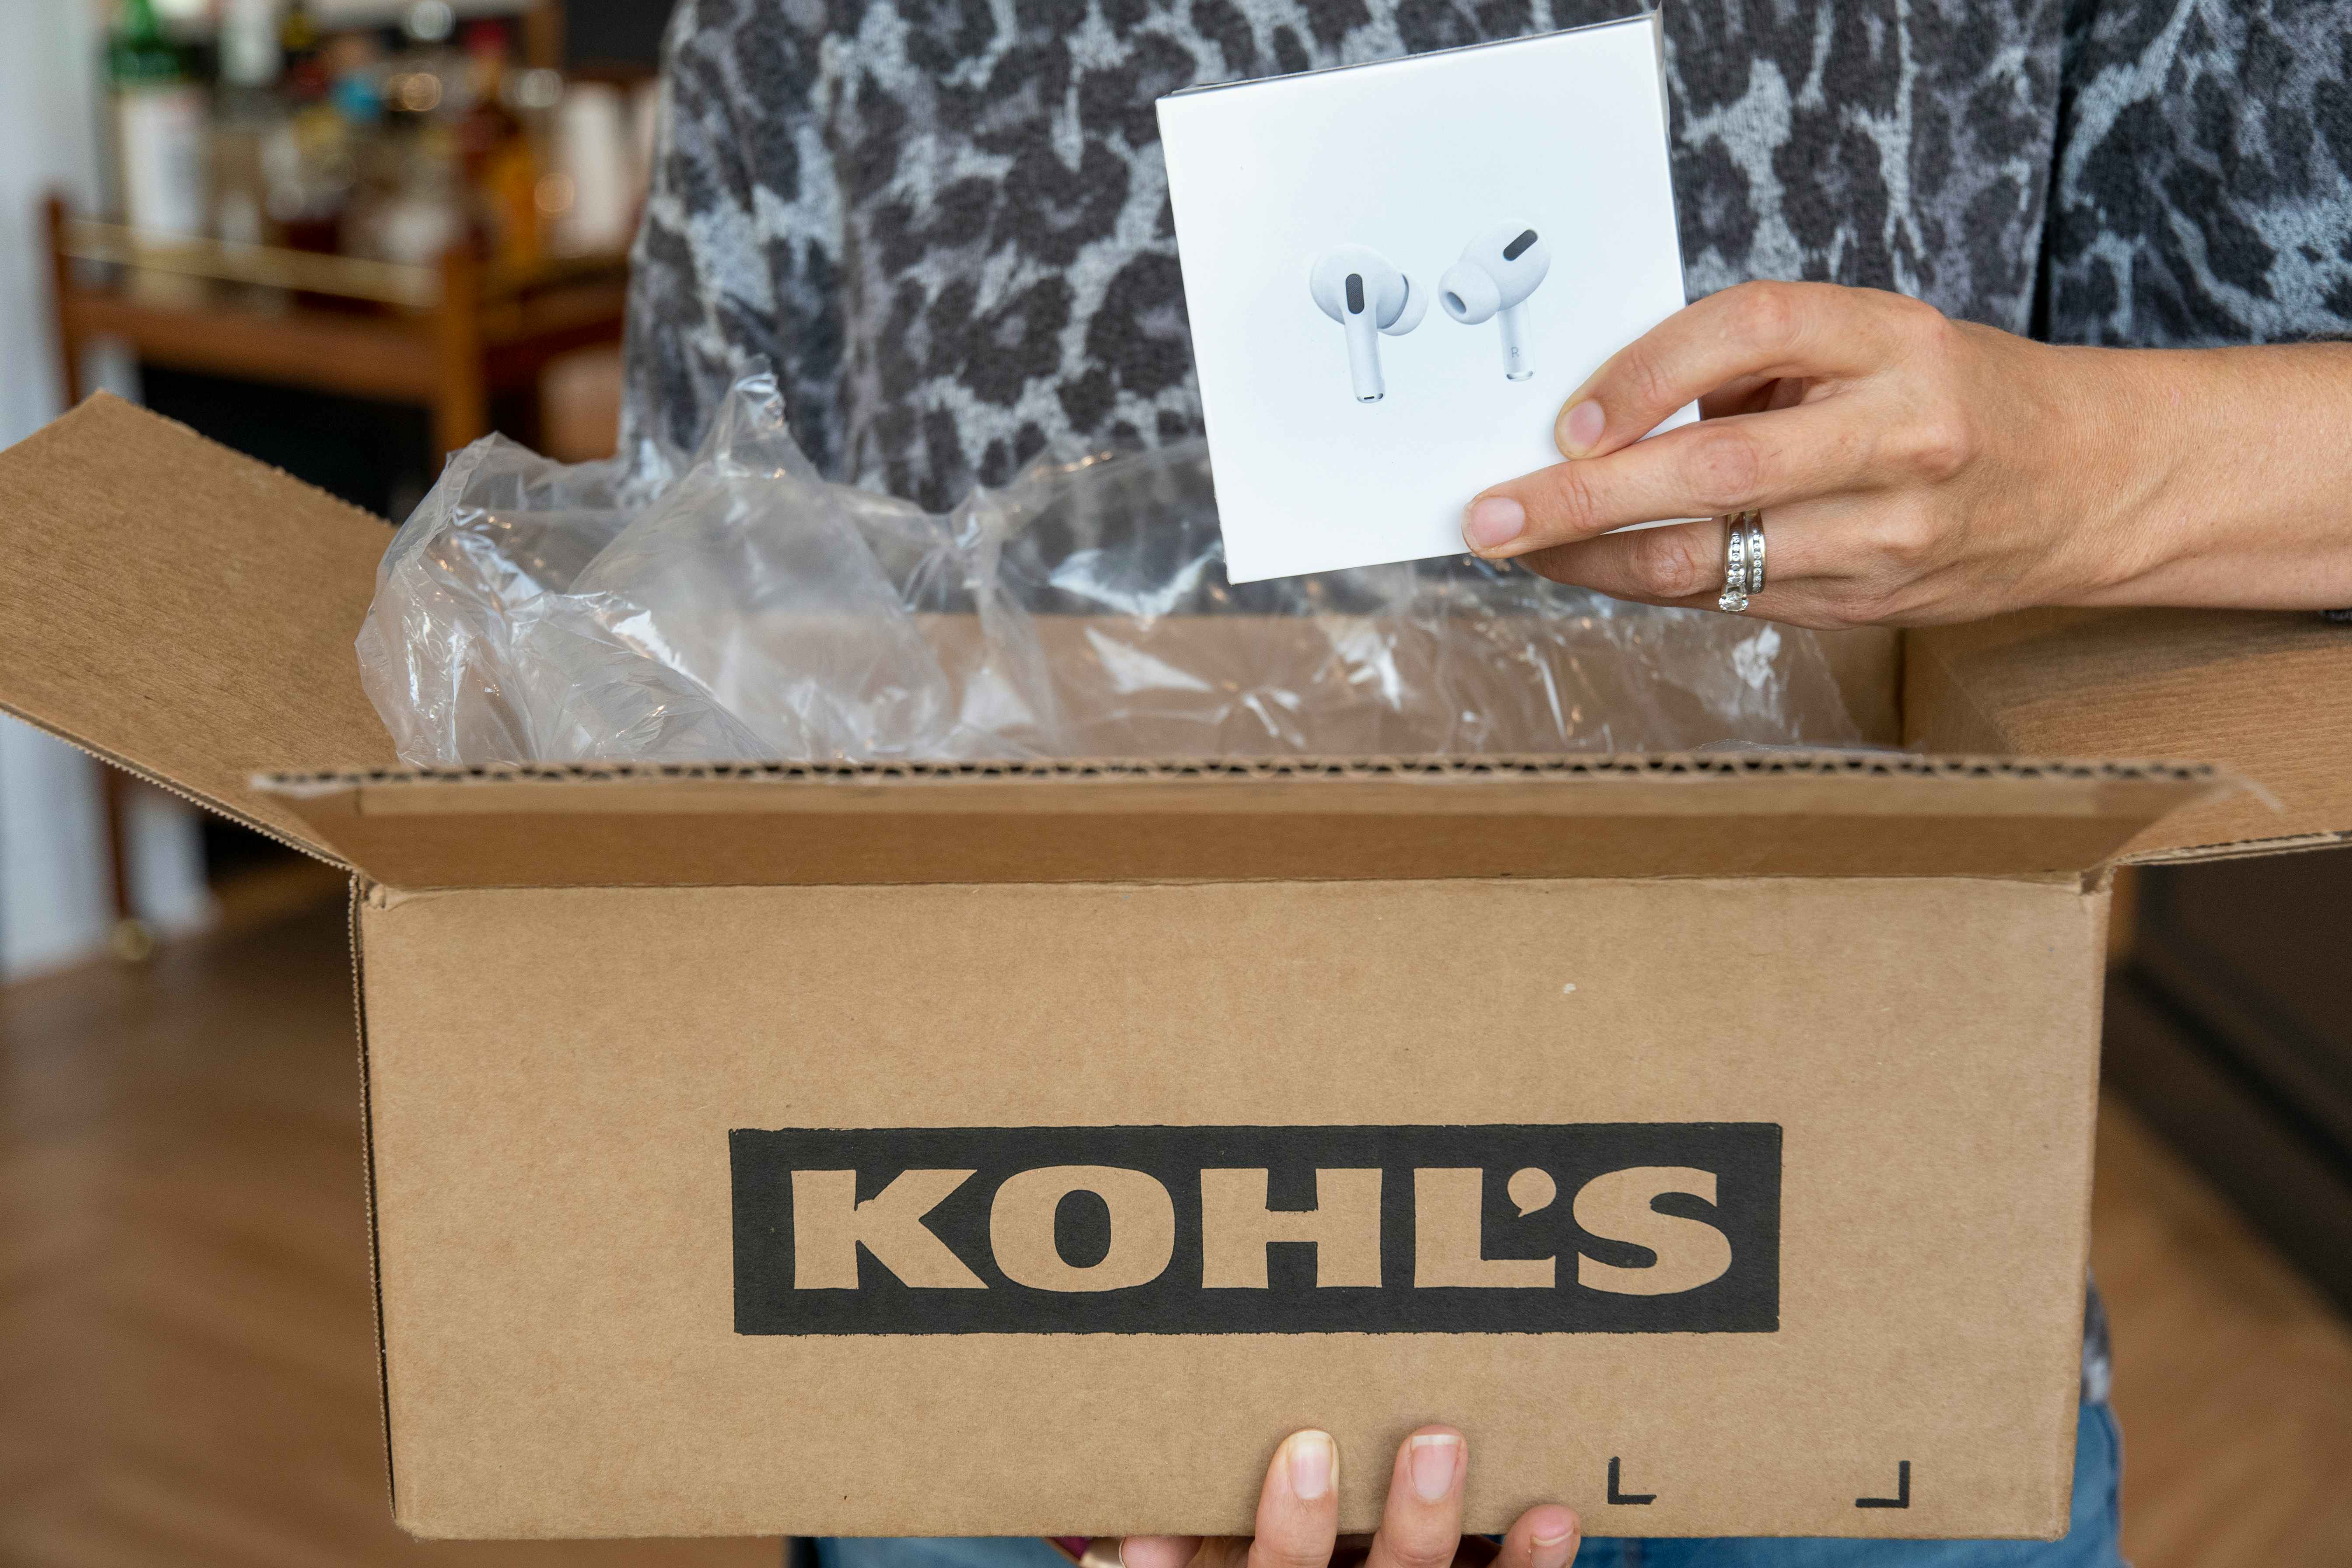 A person taking a pair of Apple Airpods out of a Kohl's box.